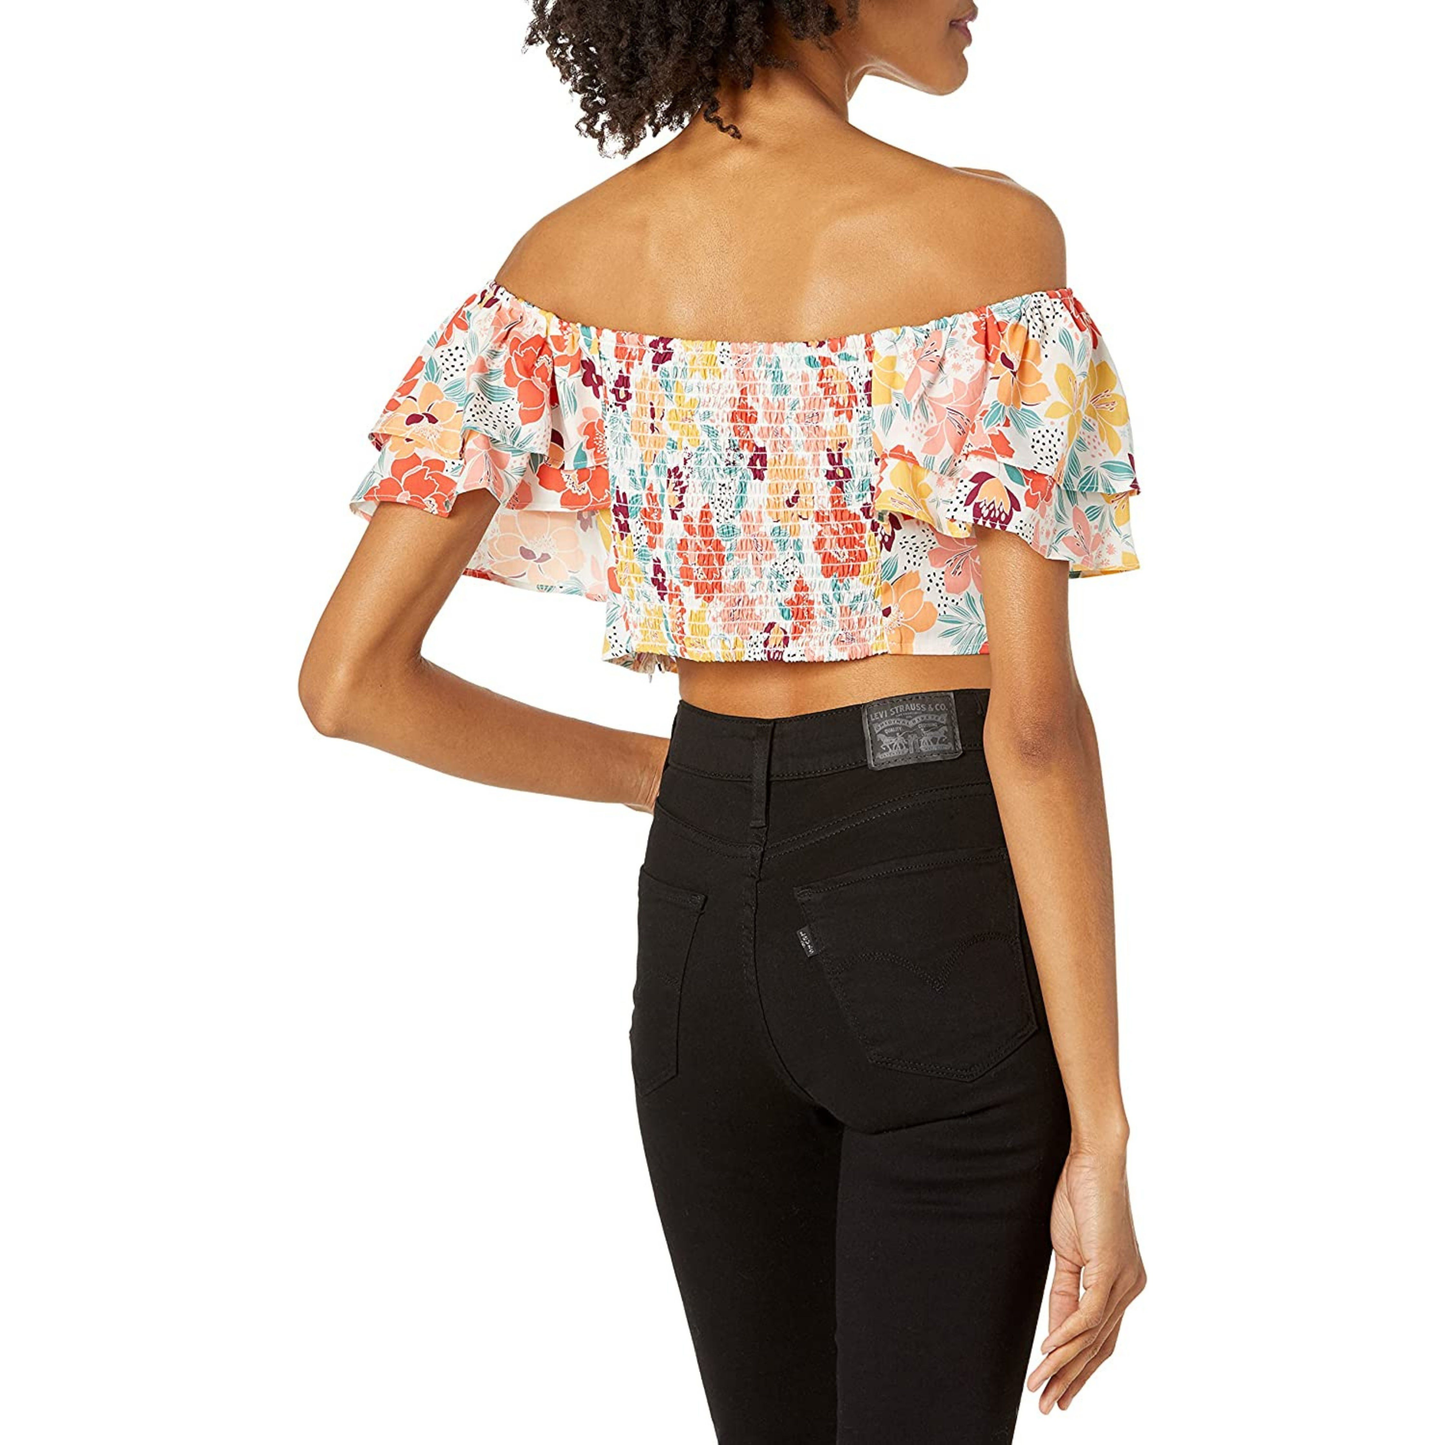 BCBGeneration Cropped Ruffled TopTop Shirt Floral (Size Small)